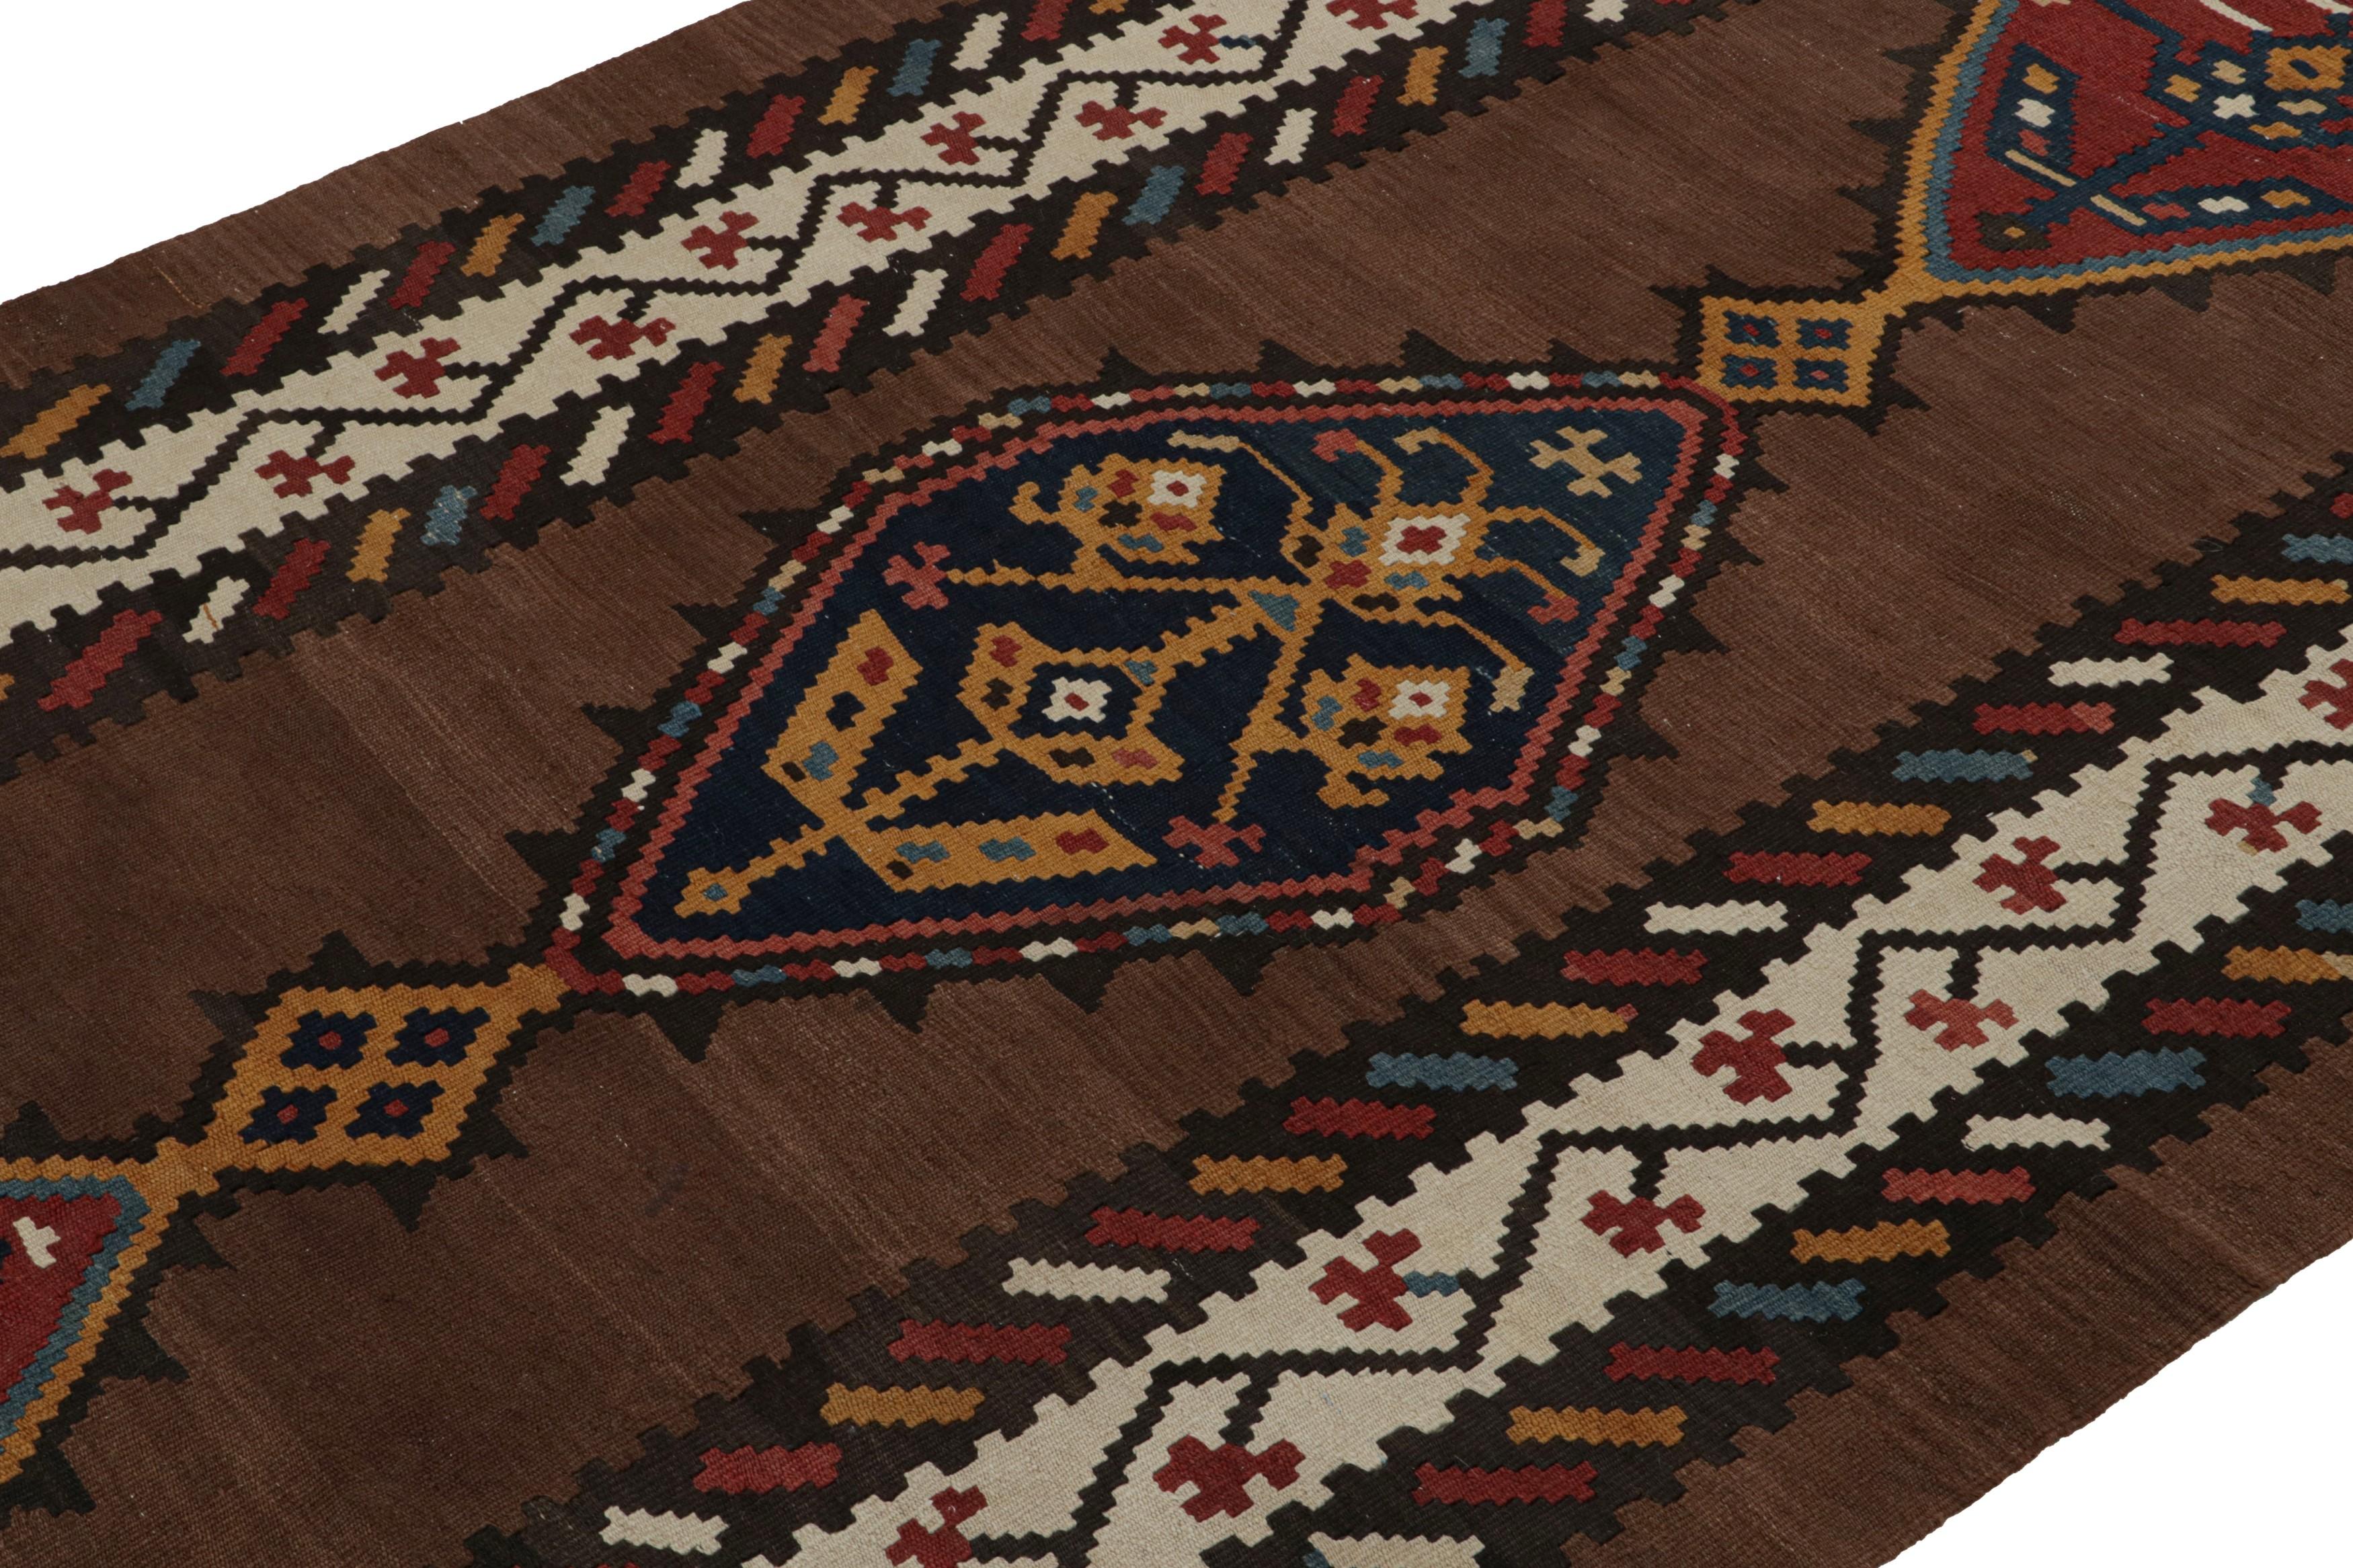 Hand-Woven Vintage Persian tribal Kilim Runner rug with Medallions from Rug & Kilim For Sale